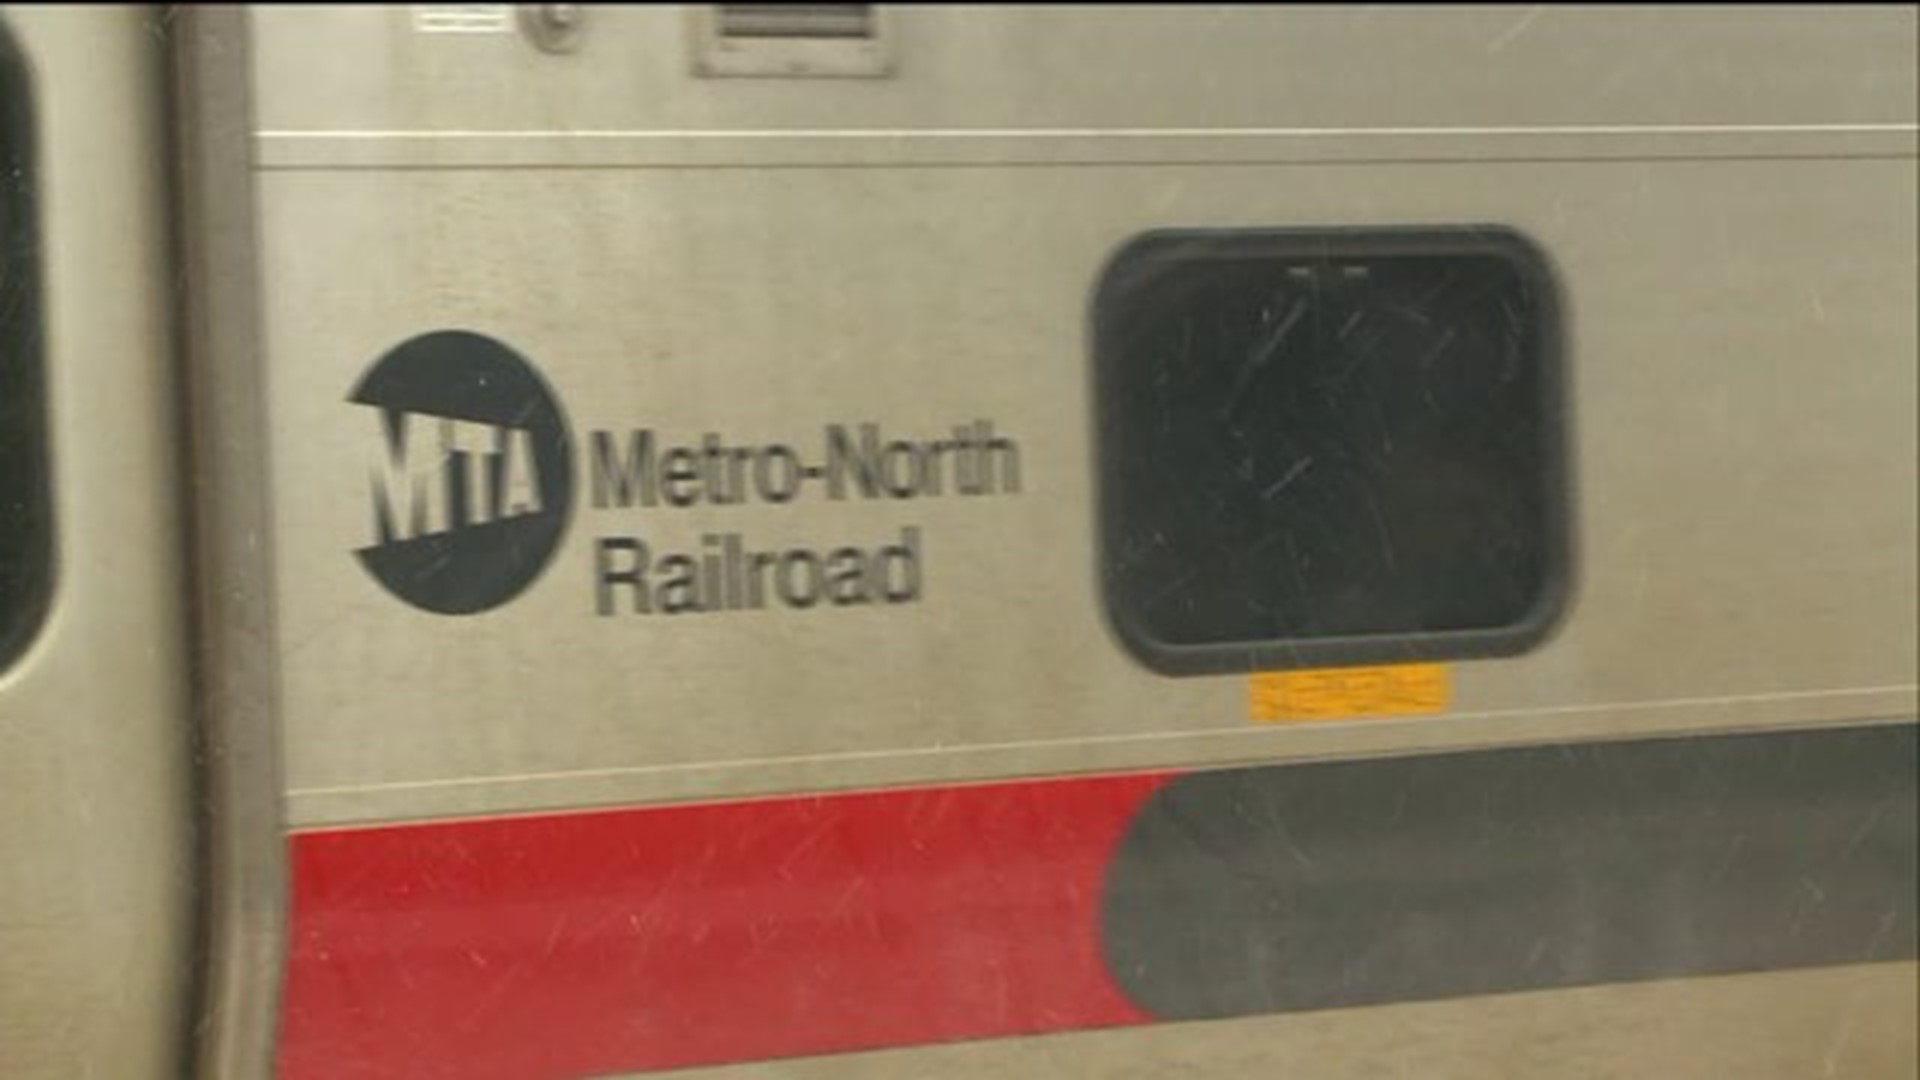 Should Connecticut give up on Metro North?